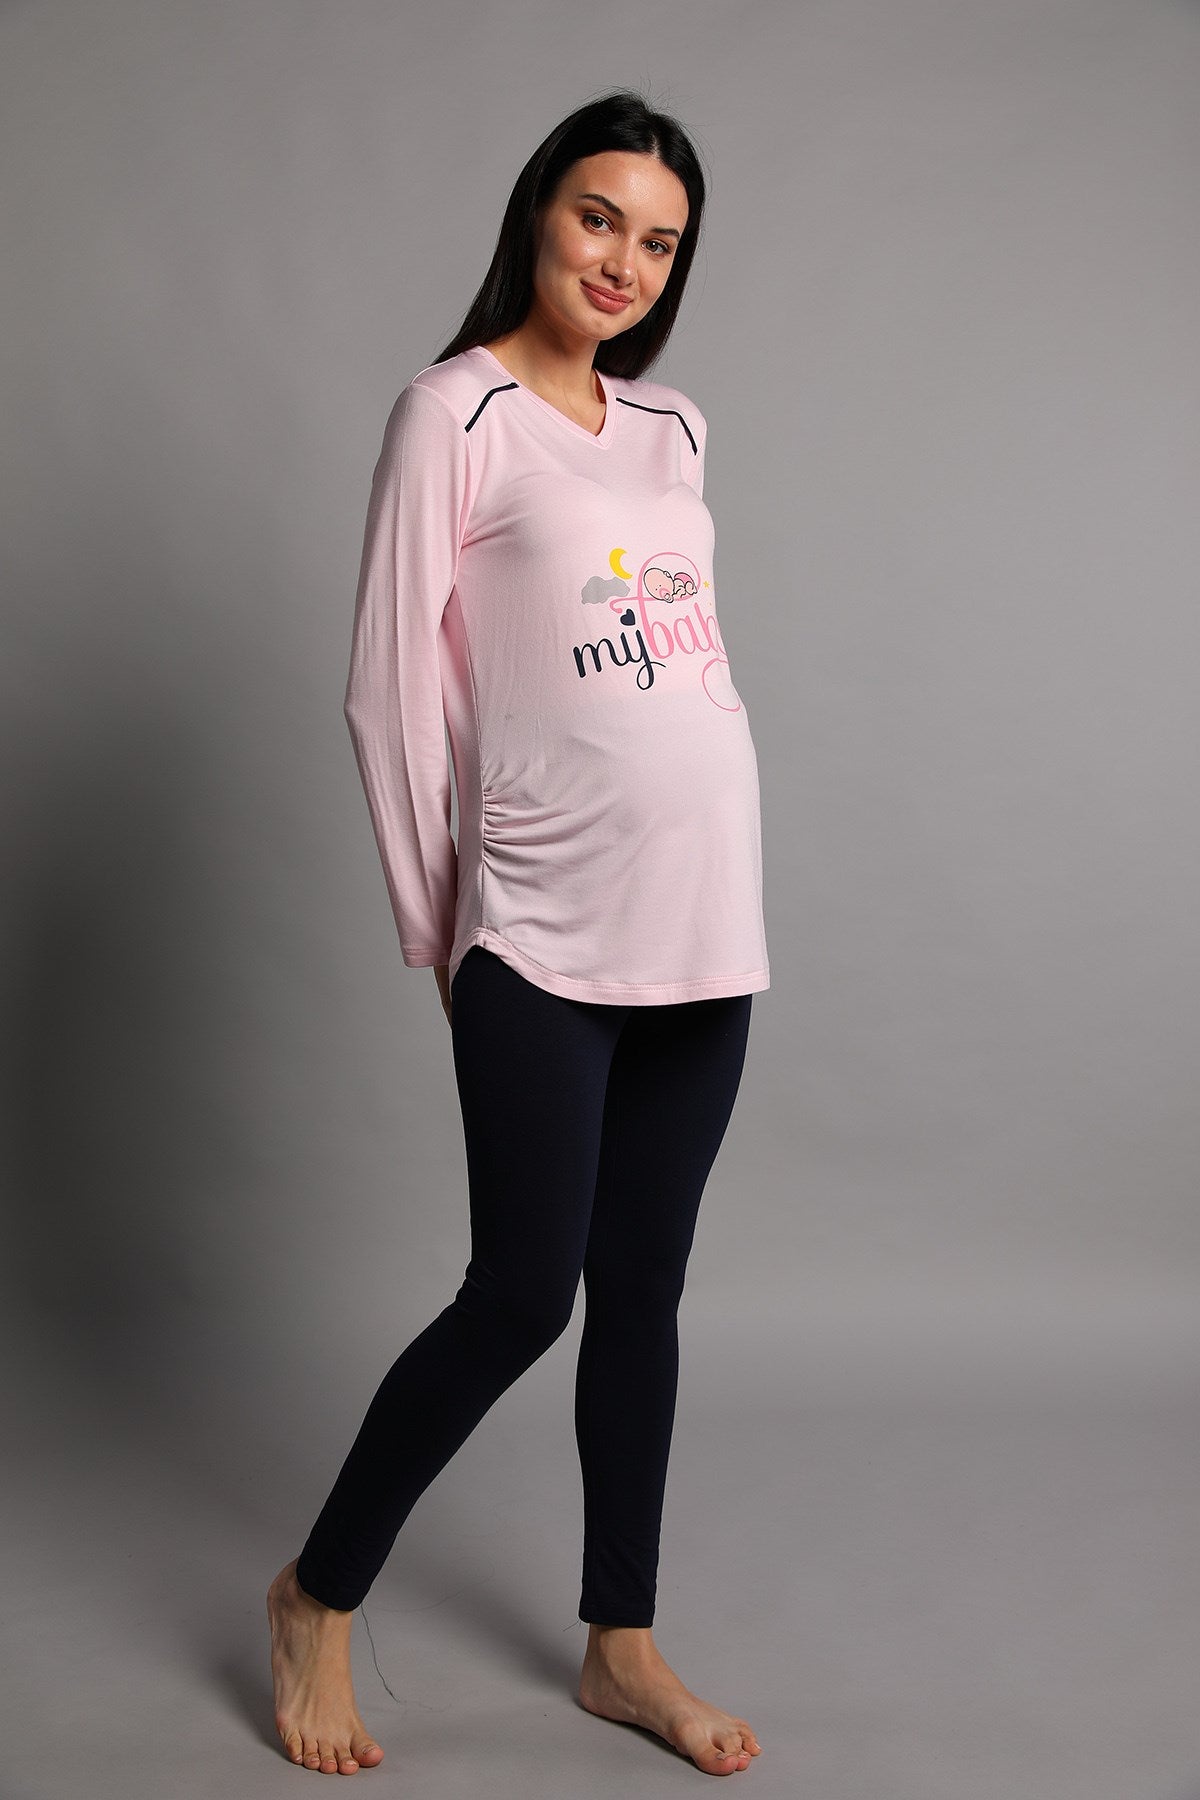 Shopymommy 5345 My Baby Maternity T-Shirt & Tights Set Pink